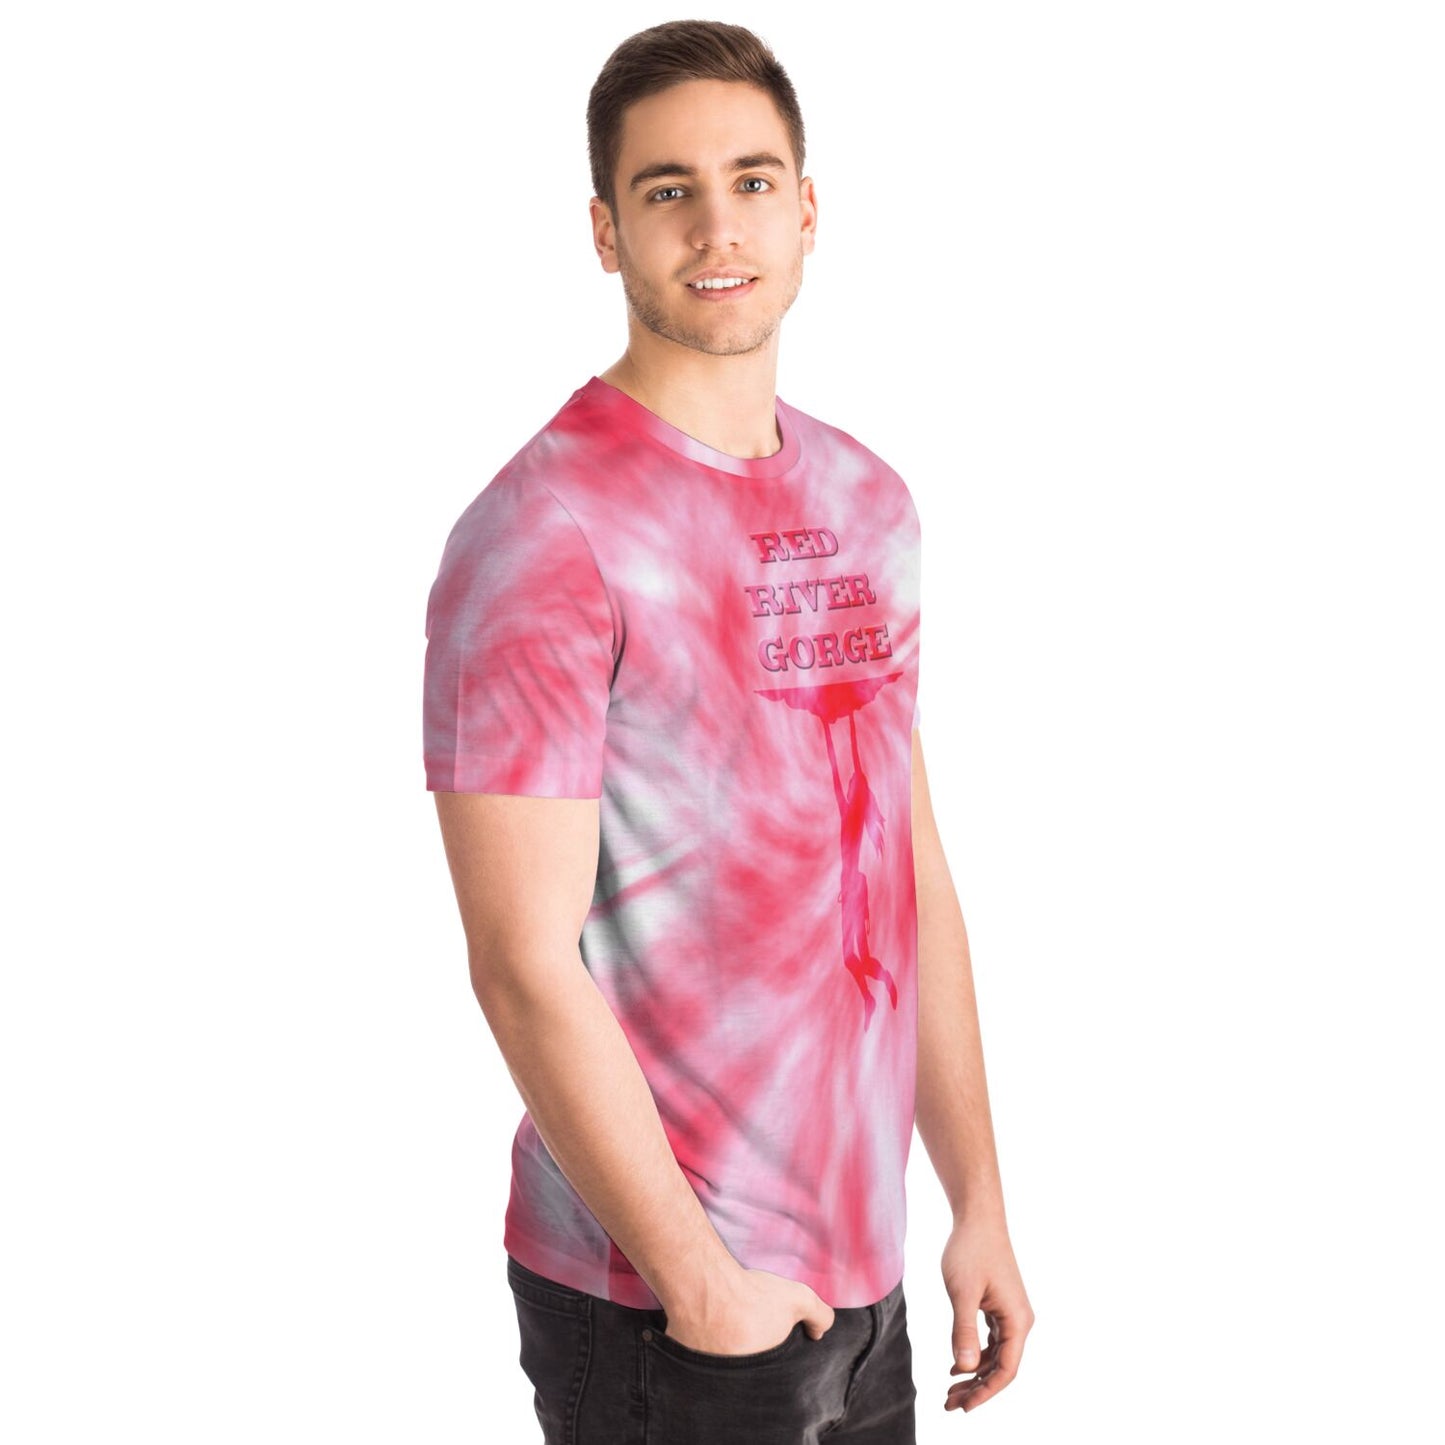 Tie Dyes - Red (Red River Gorge)